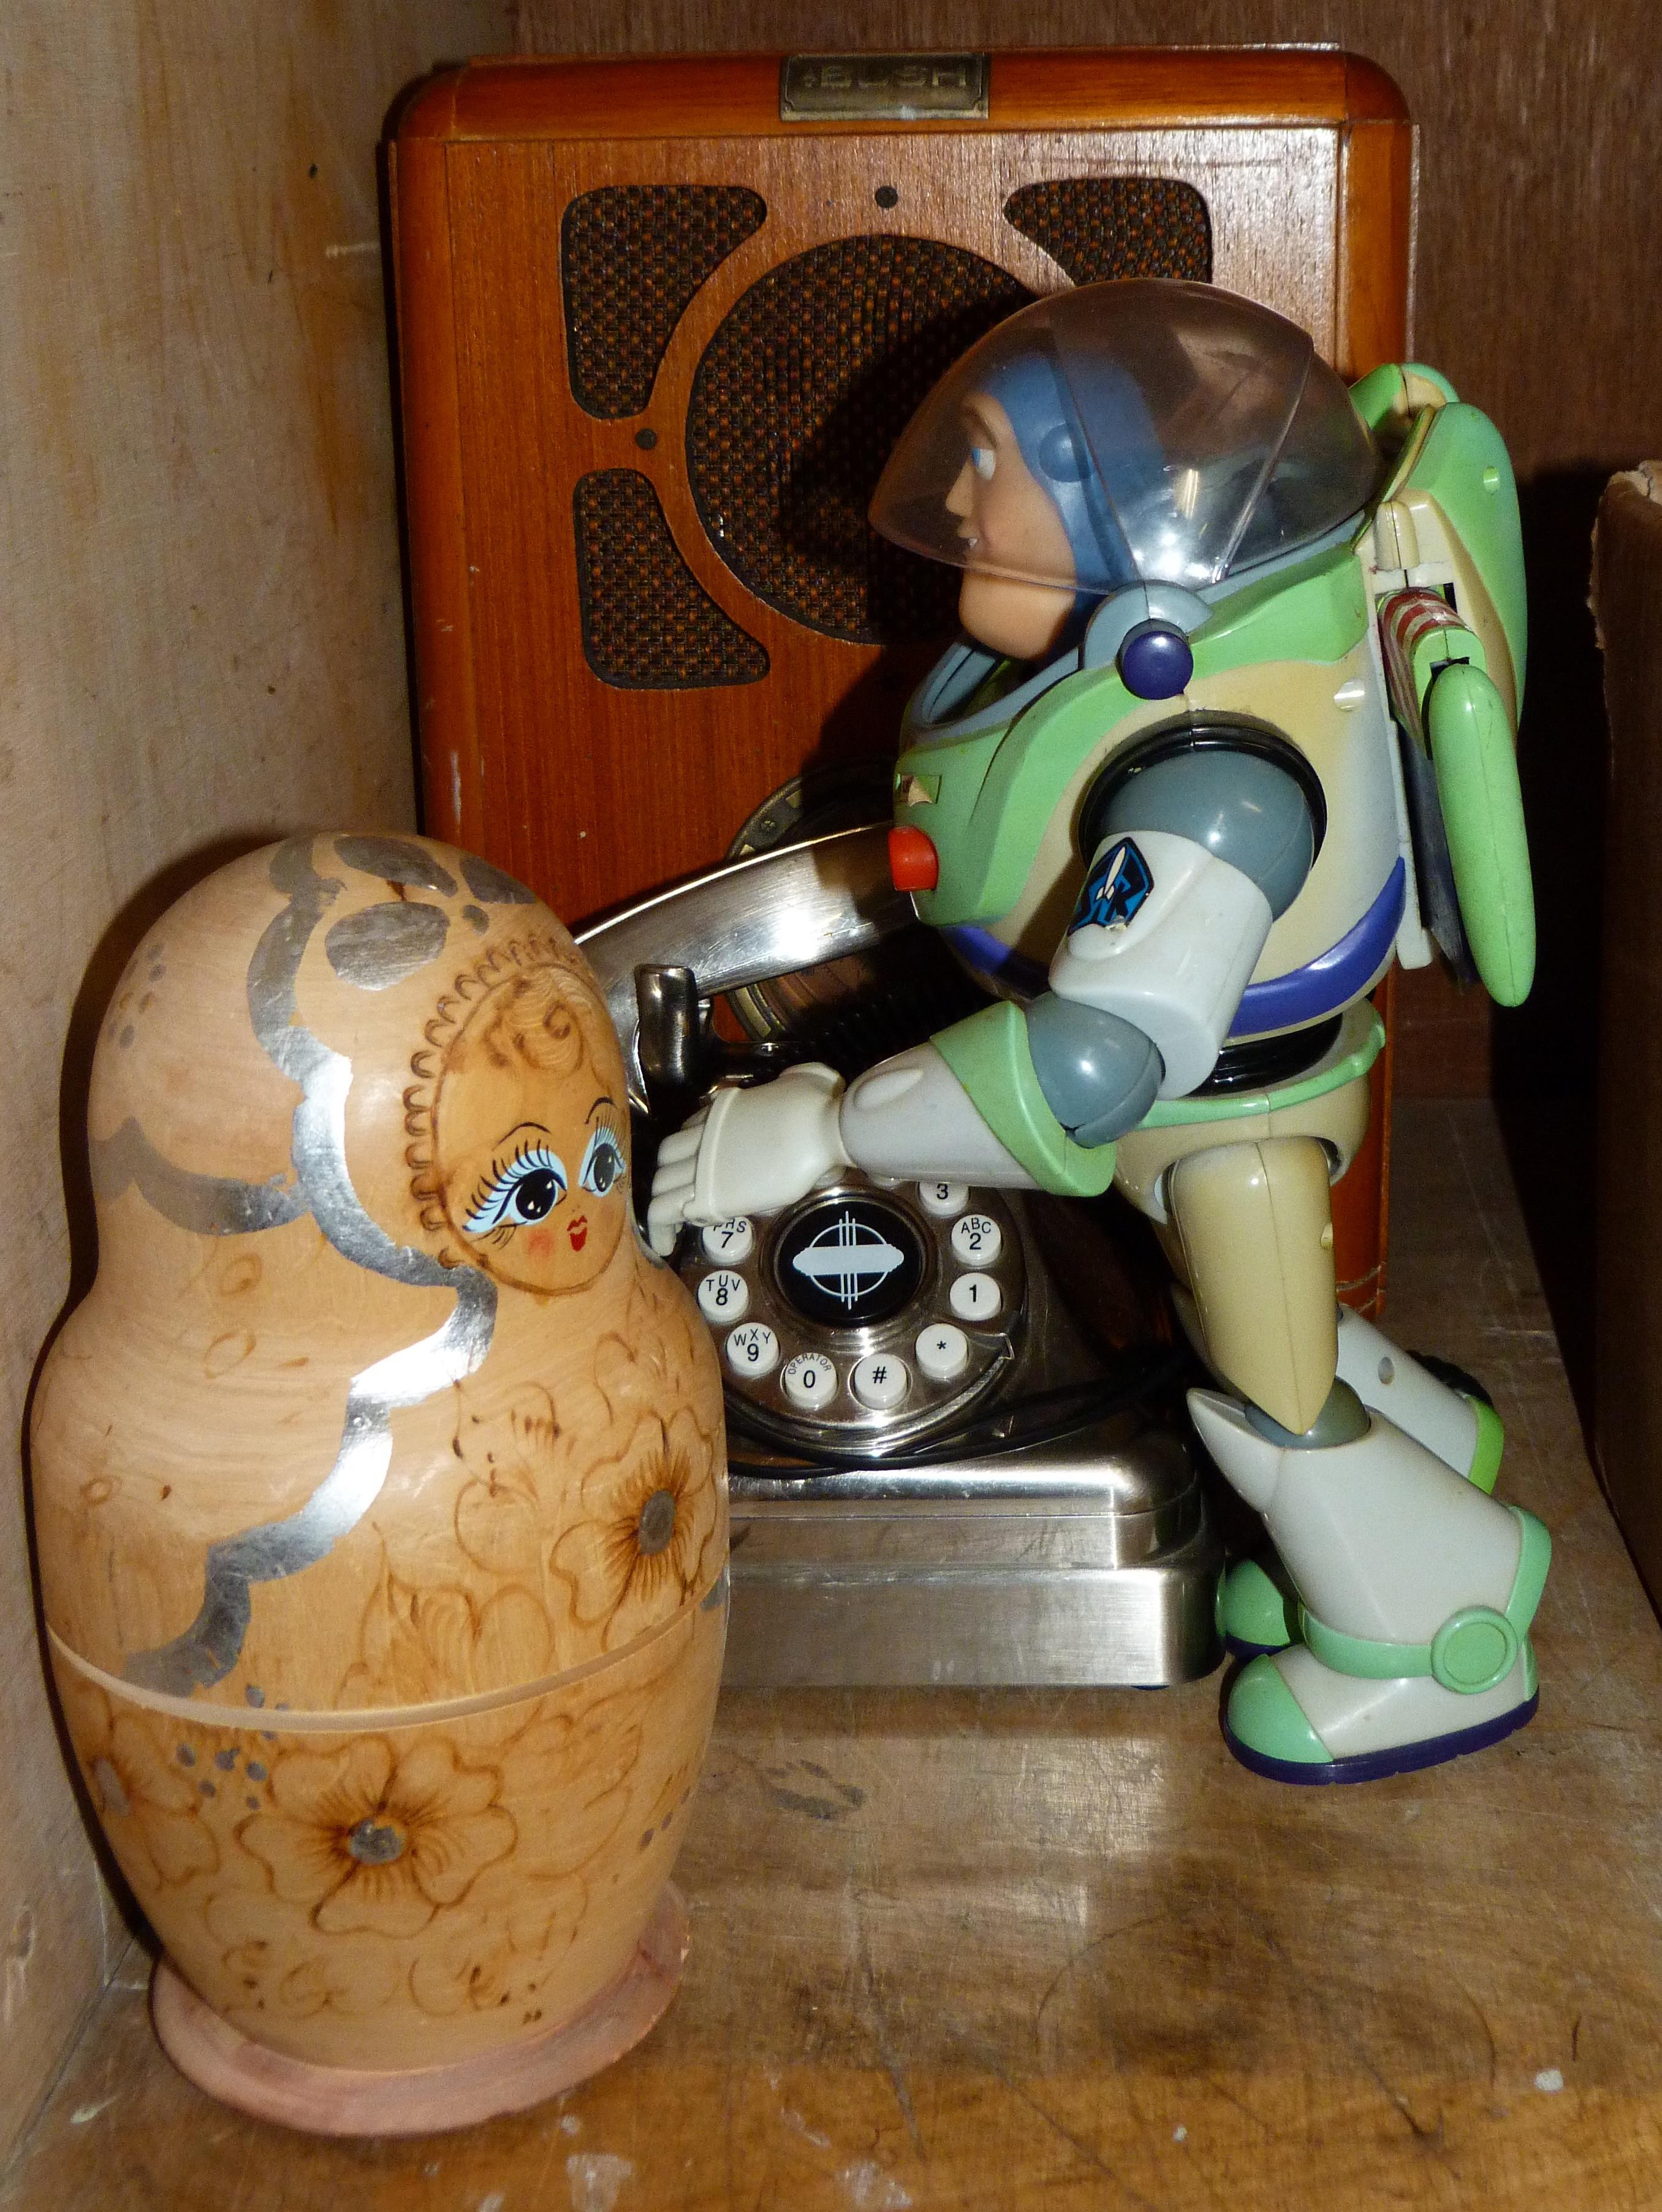 A retro style wireless, a vintage style phone, a Buzz Lightyear figure and a Russian doll